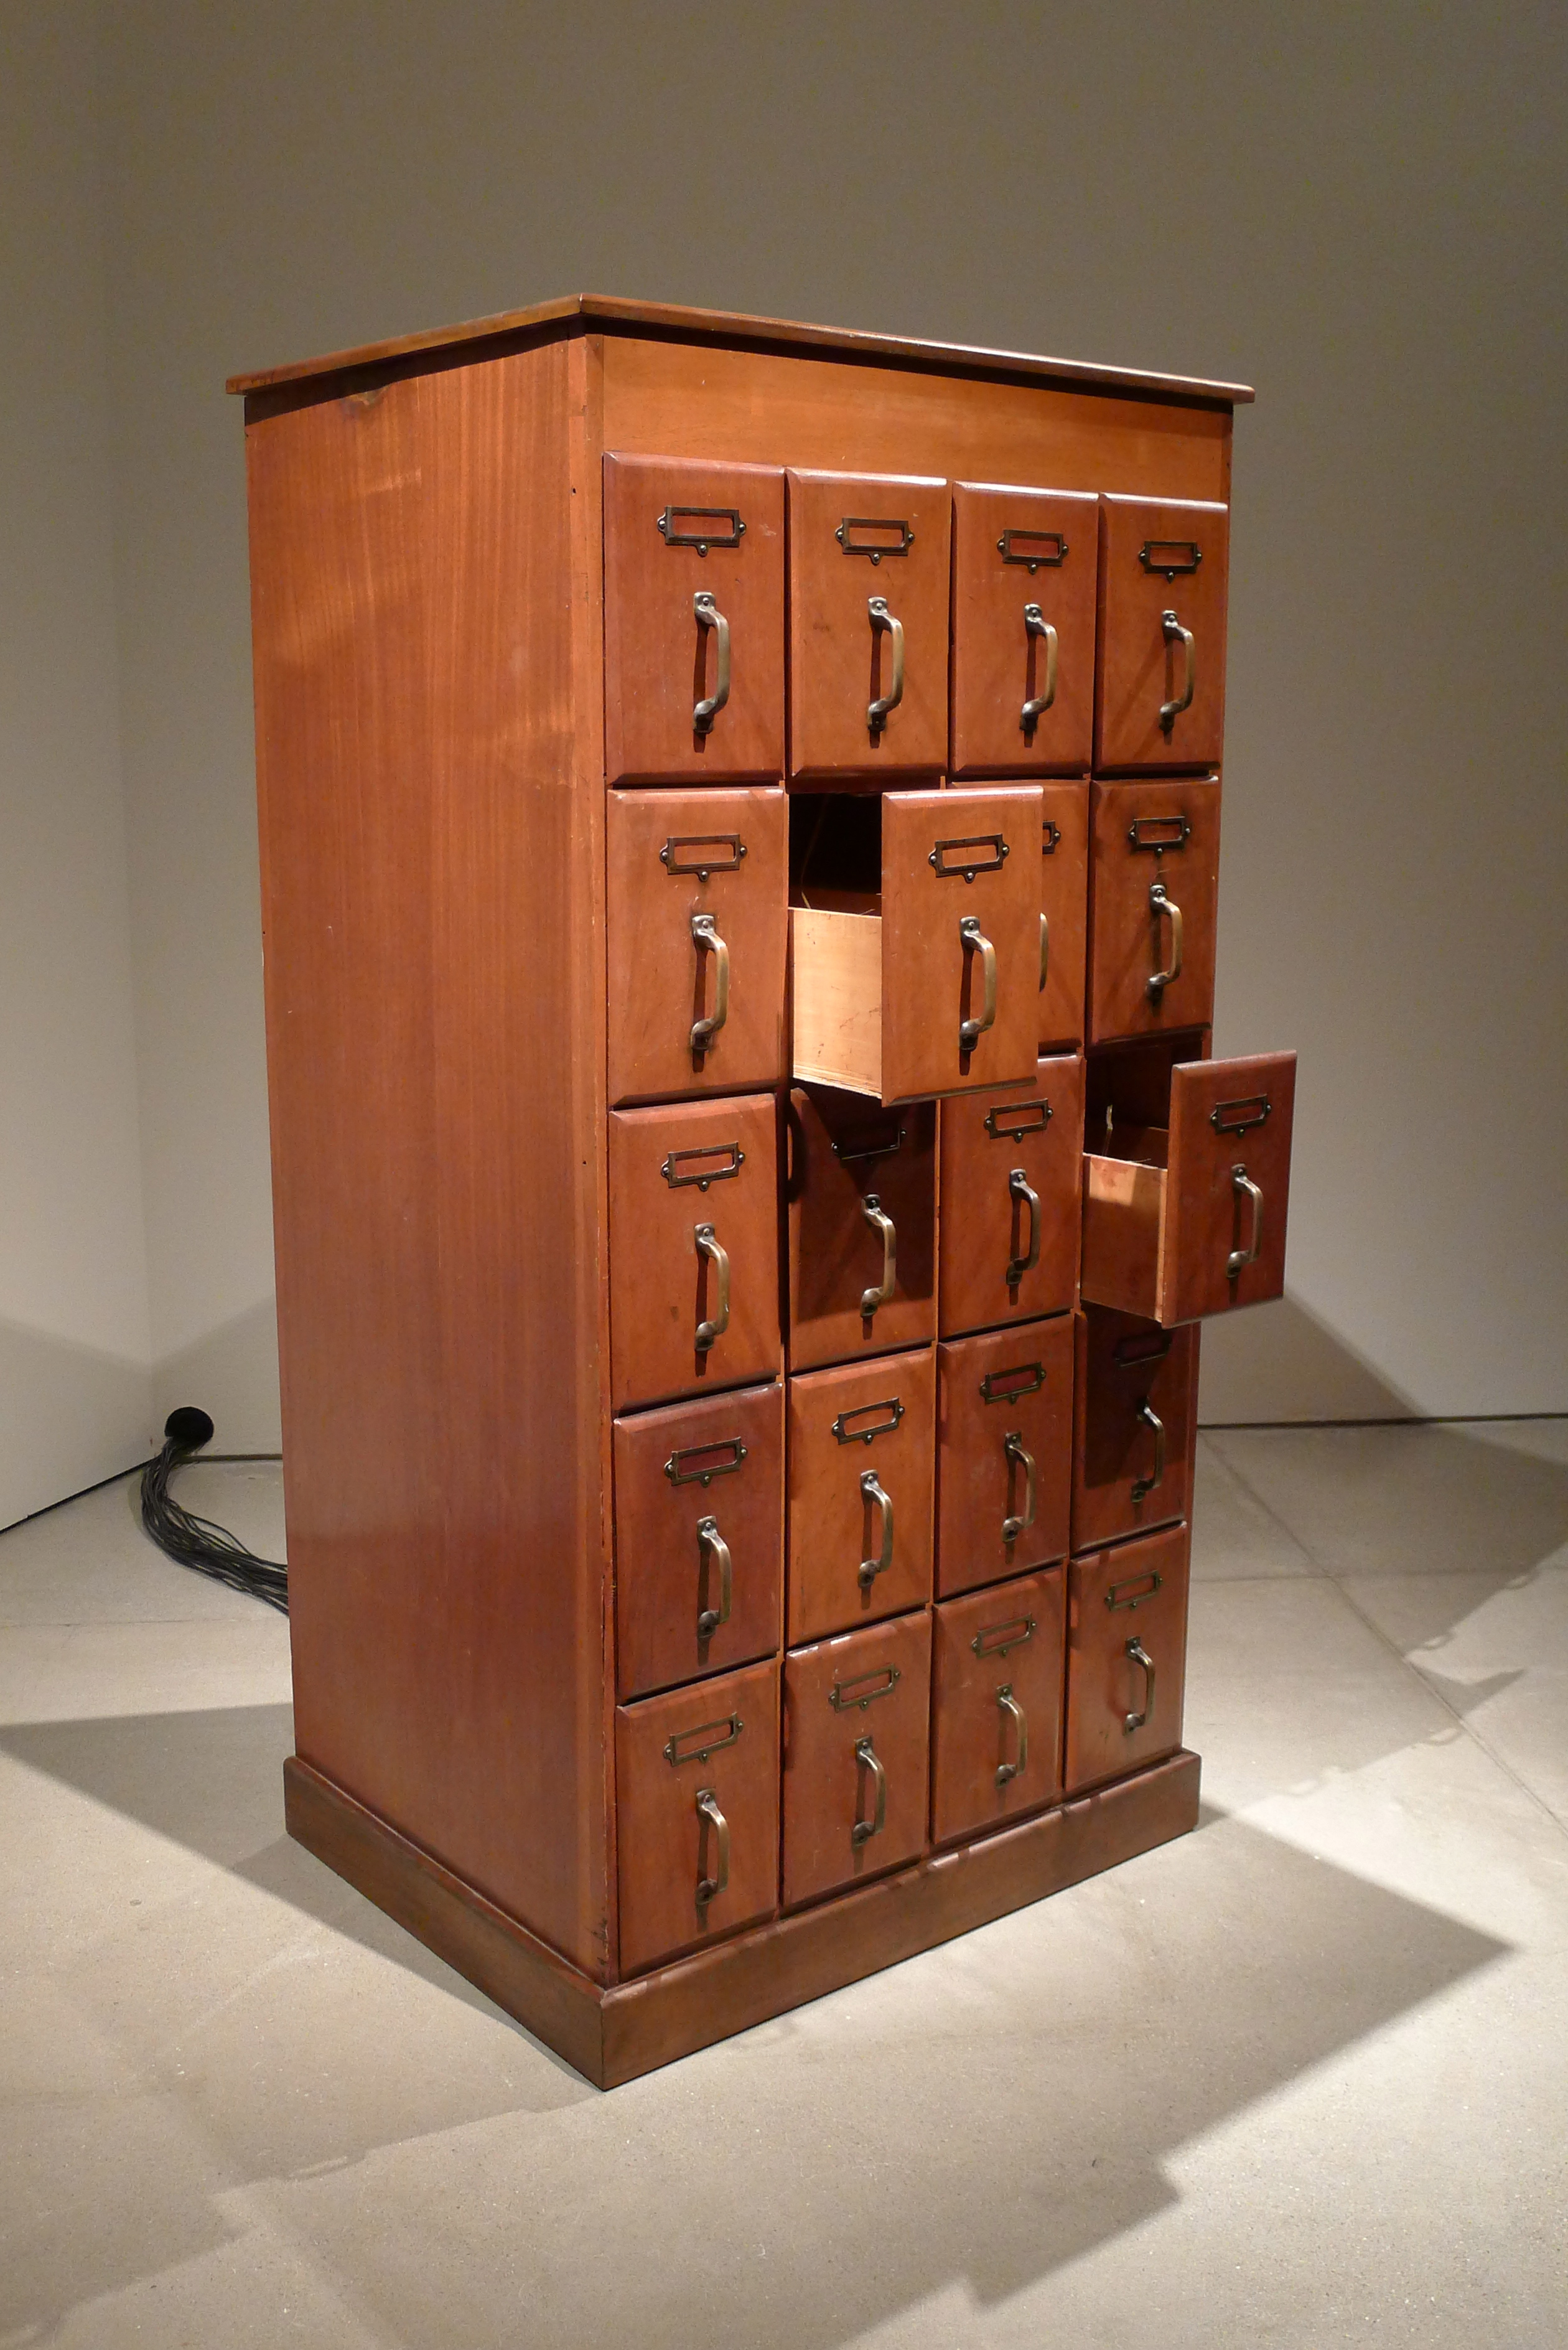 Janet Cardiff & George Bures Miller: "The Cabinet of Curiousness", 2010, Foto: Klaas